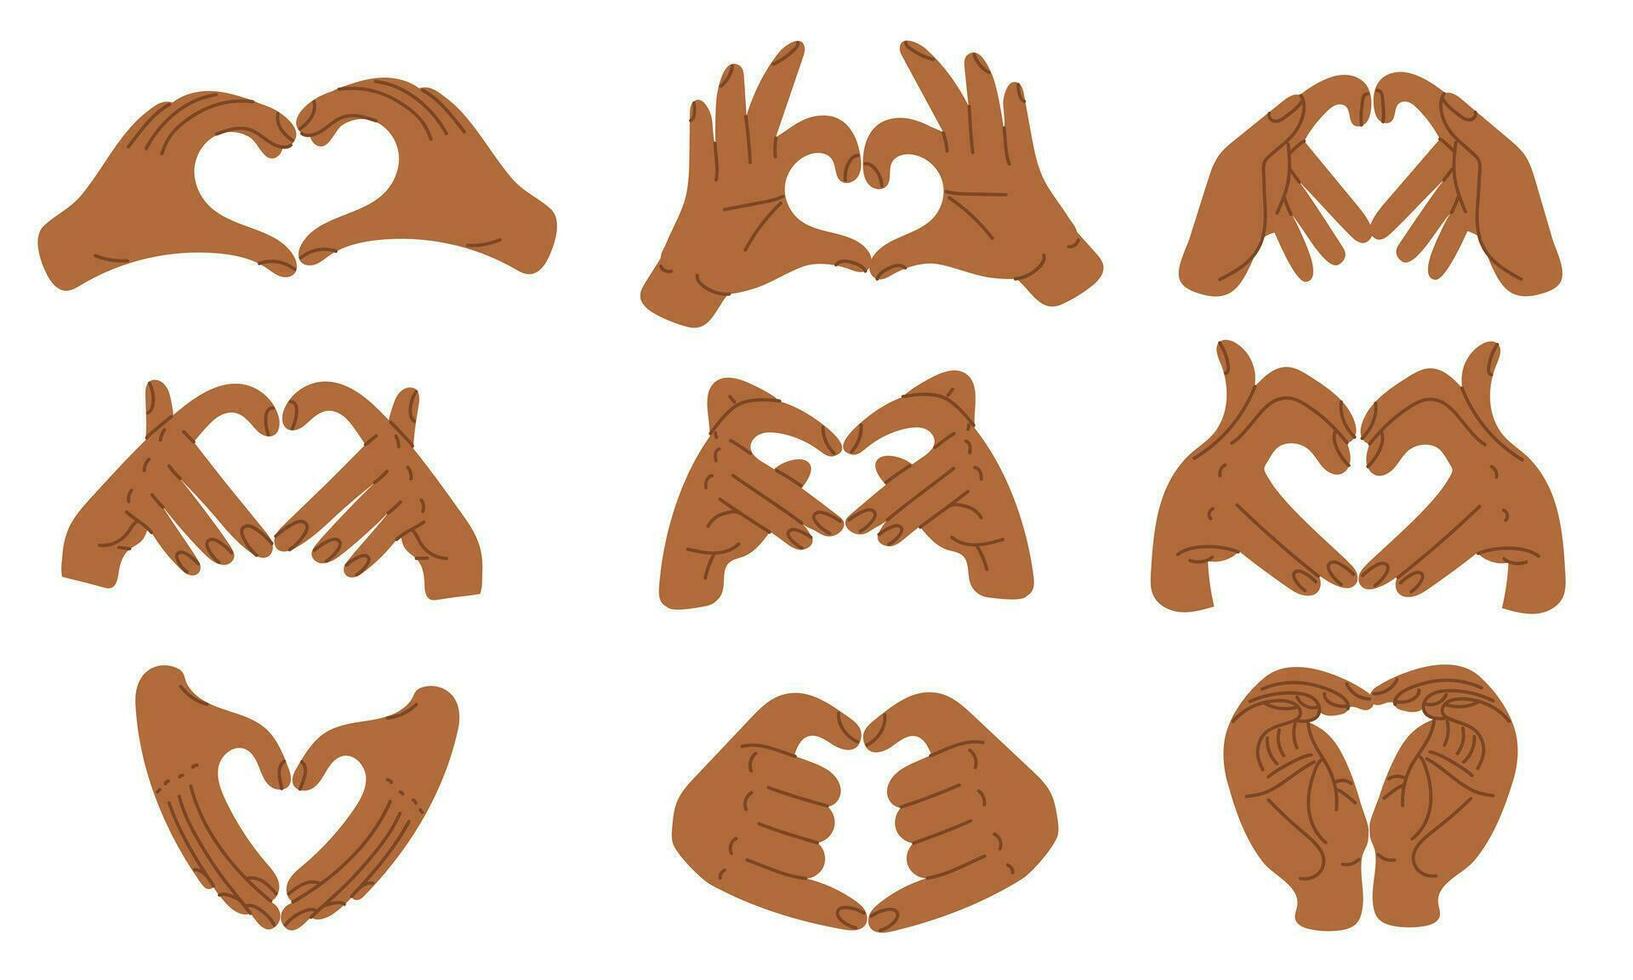 A set of light hands with a heart sign, the designation I love you. Images for Valentine's Day, heart shapes with one hand. Lots of hearts in dark shades, mulatto. One person shows love for others vector